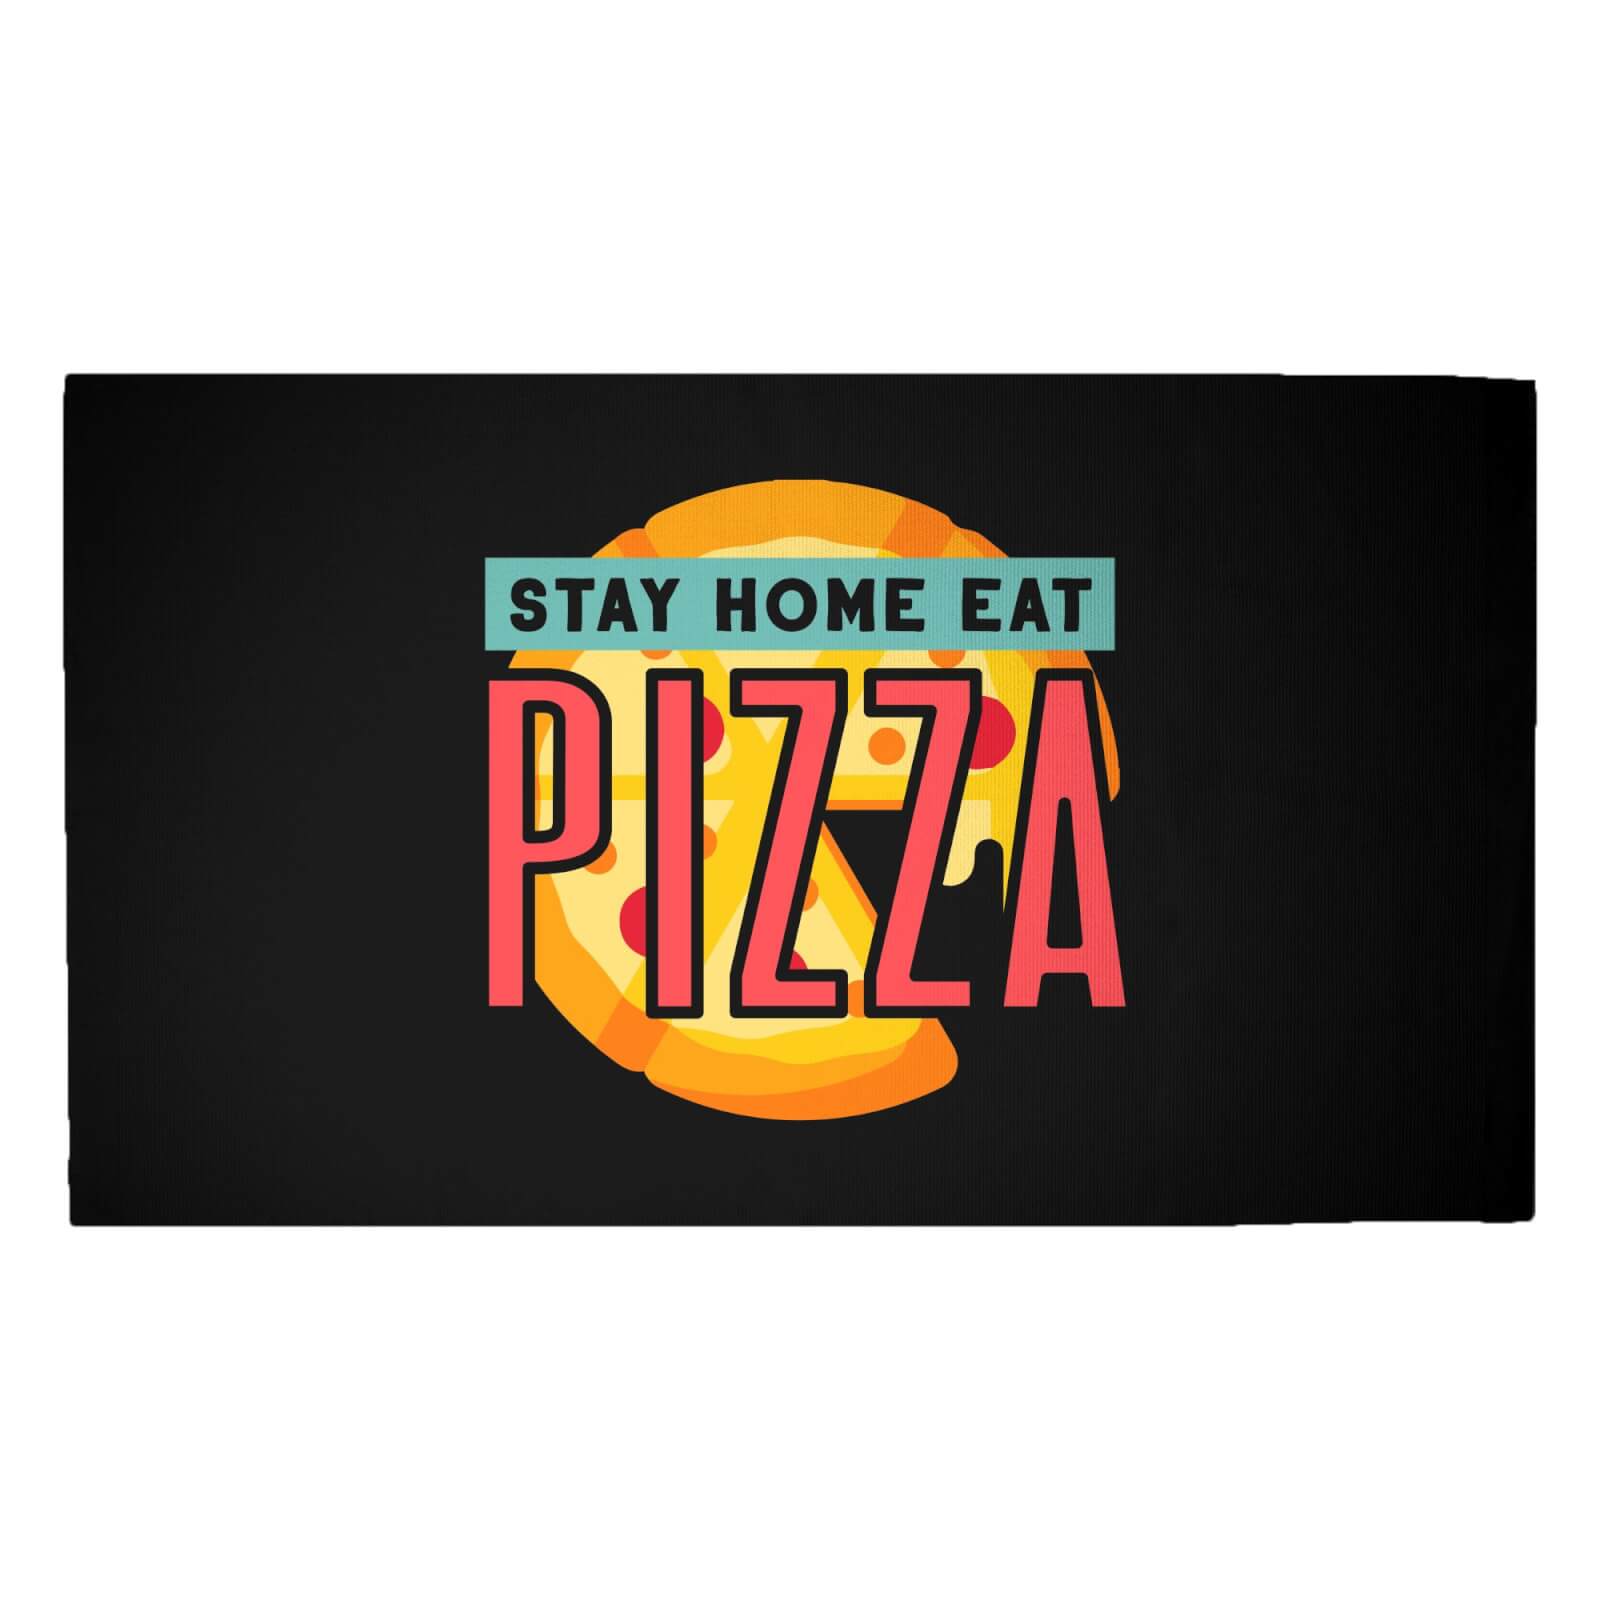 Stay Home Eat Pizza Woven Rug - Medium